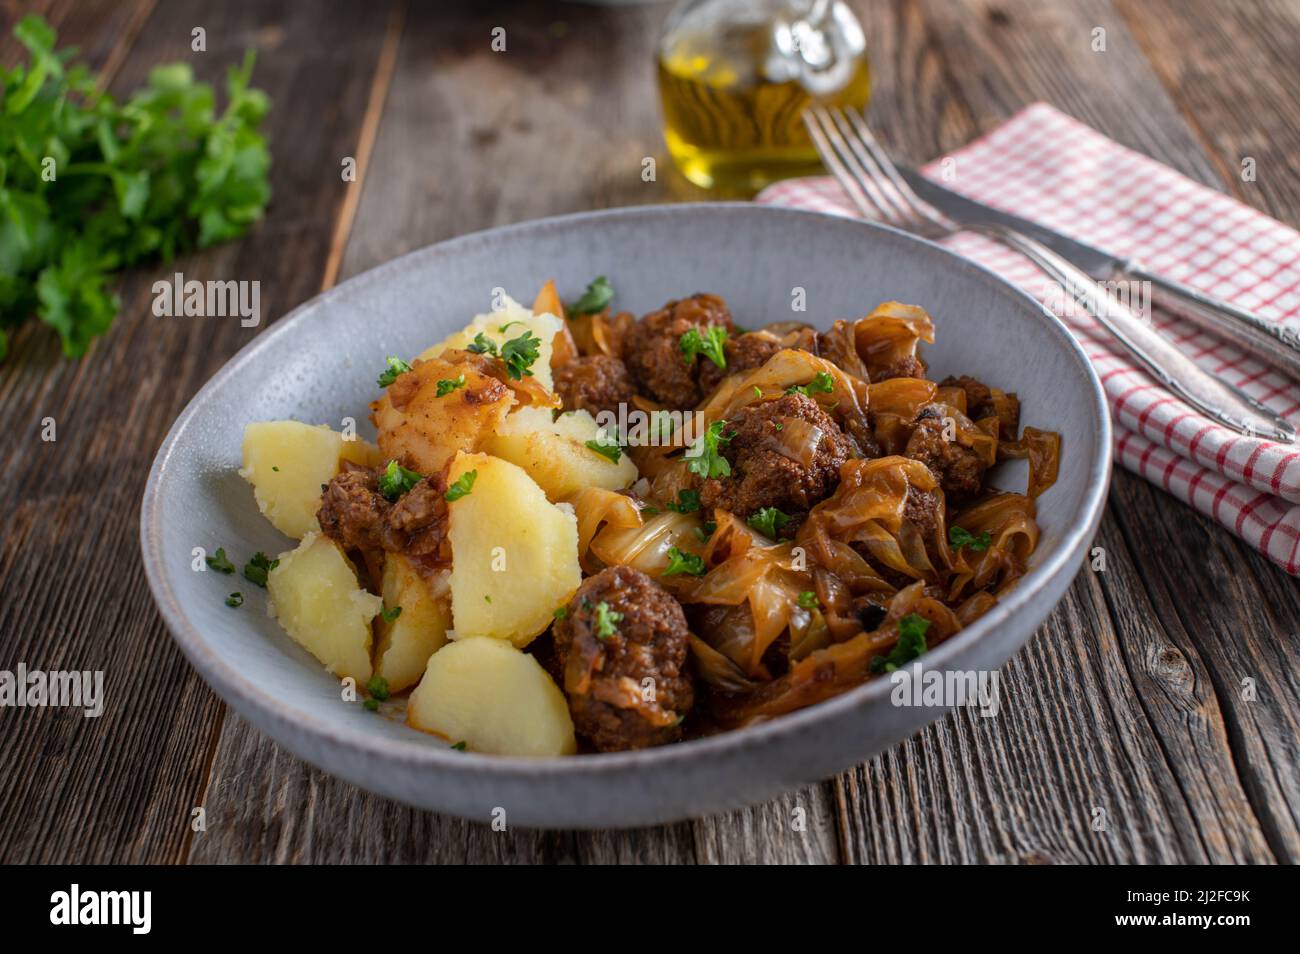 Meatball dish with fried cabbage, brown sauce and potatoes Stock Photo